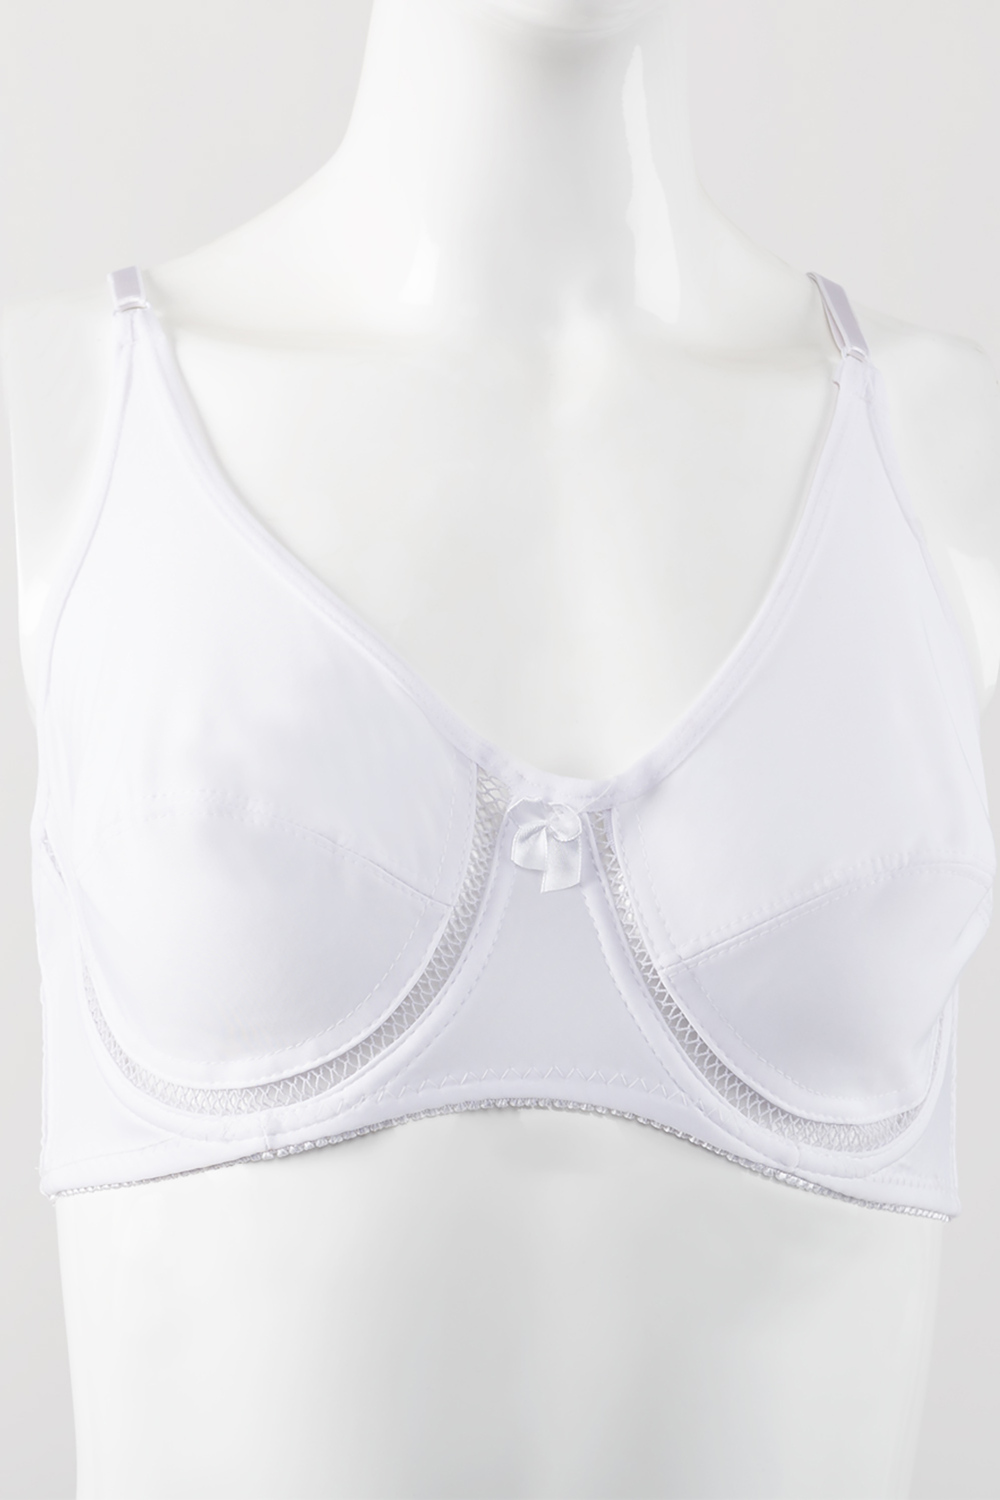 Full support underwire bra with net detail - White. Colour: white